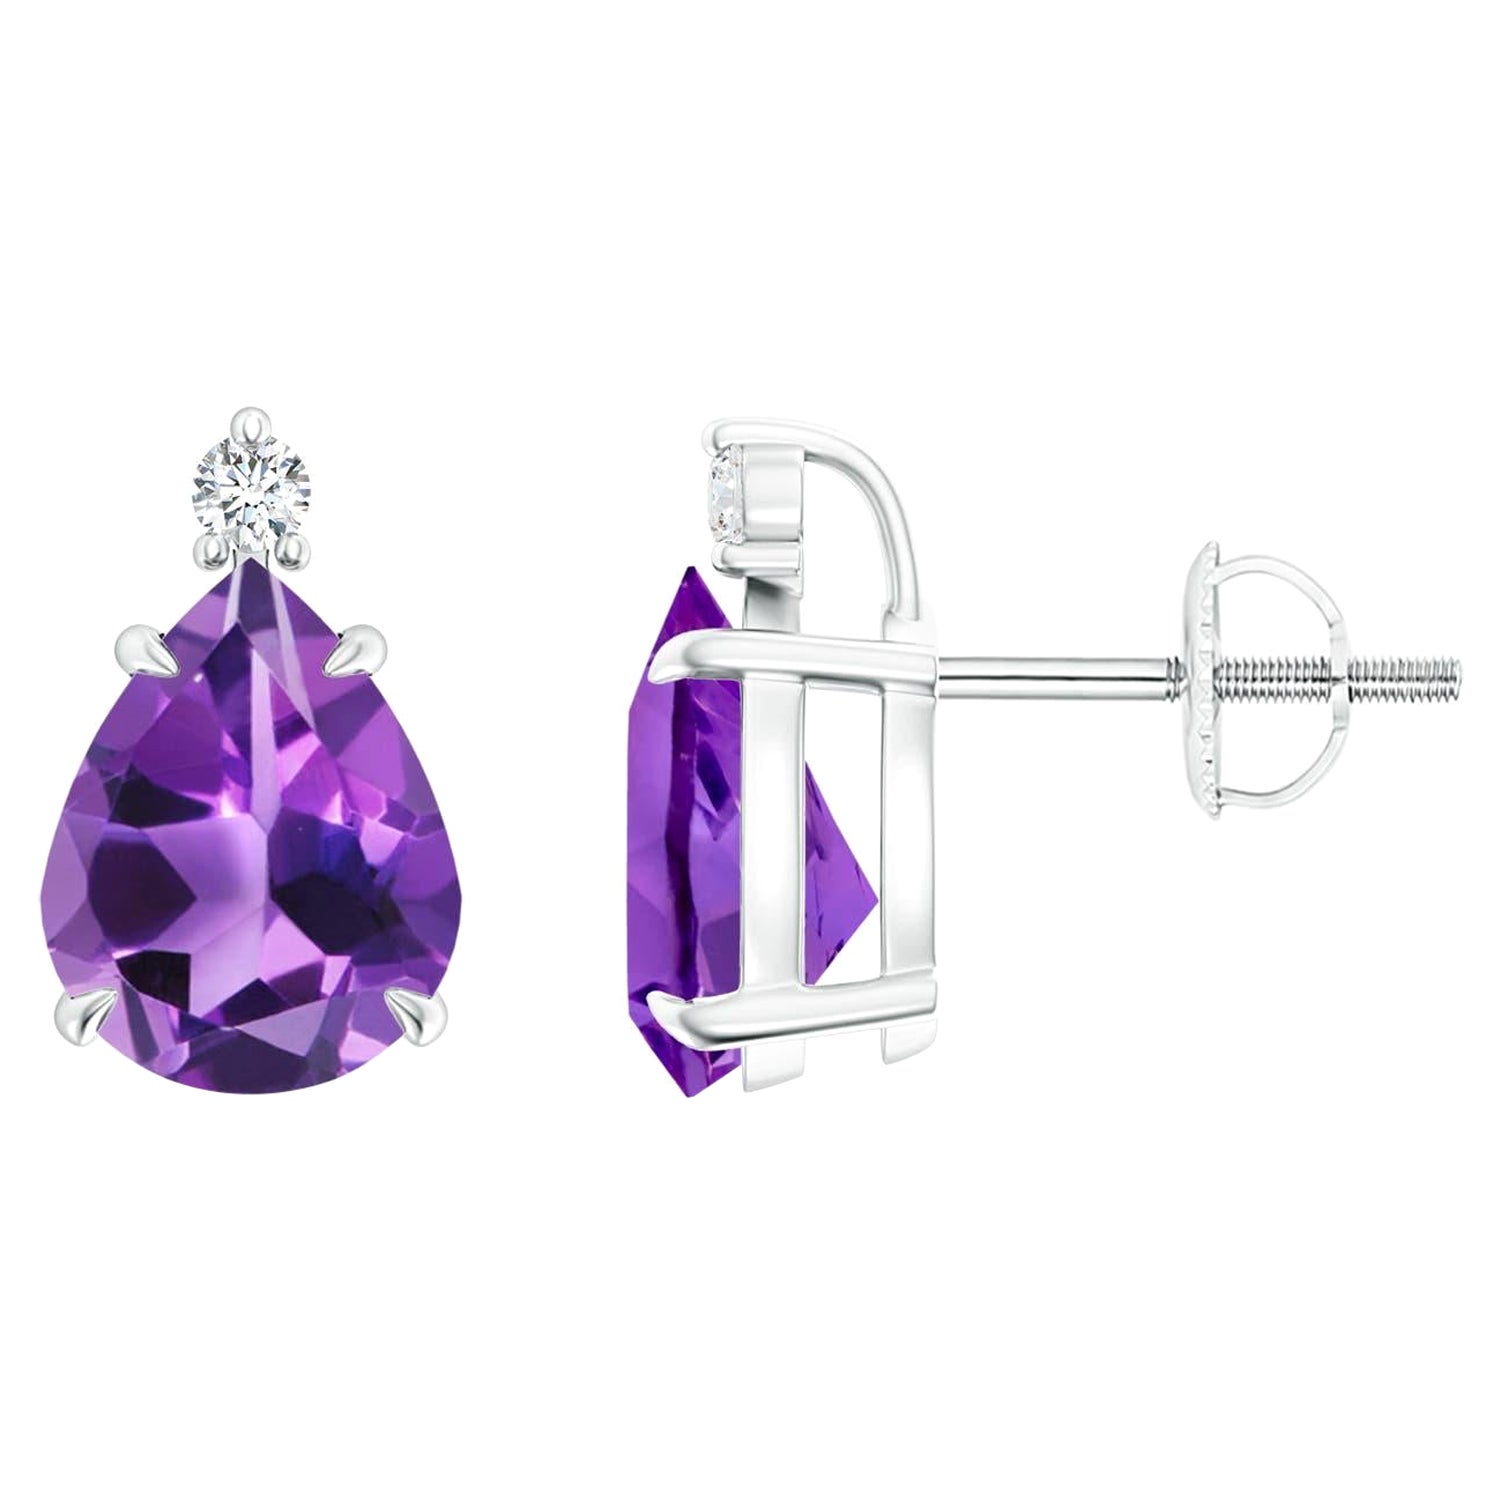 Natural Claw-Set Pear 3ct Amethyst Solitaire Earrings in 14K White Gold